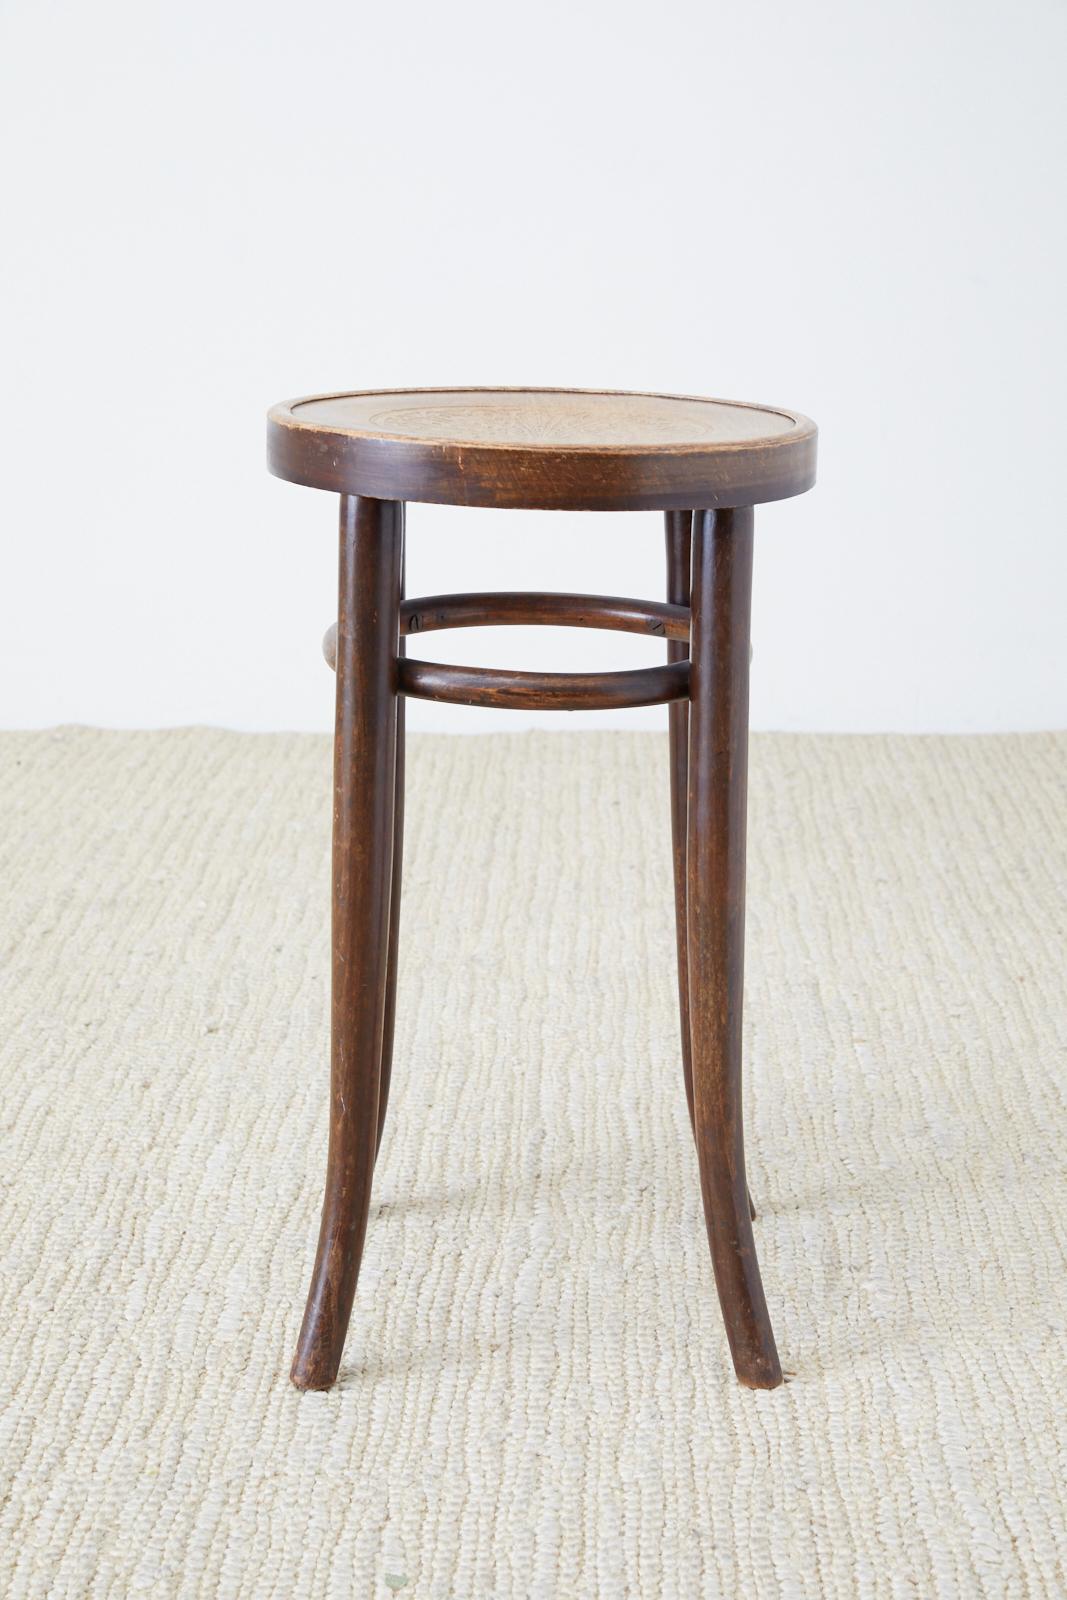 Austrian Early 20th Century Bentwood Stool Attributed to Thonet